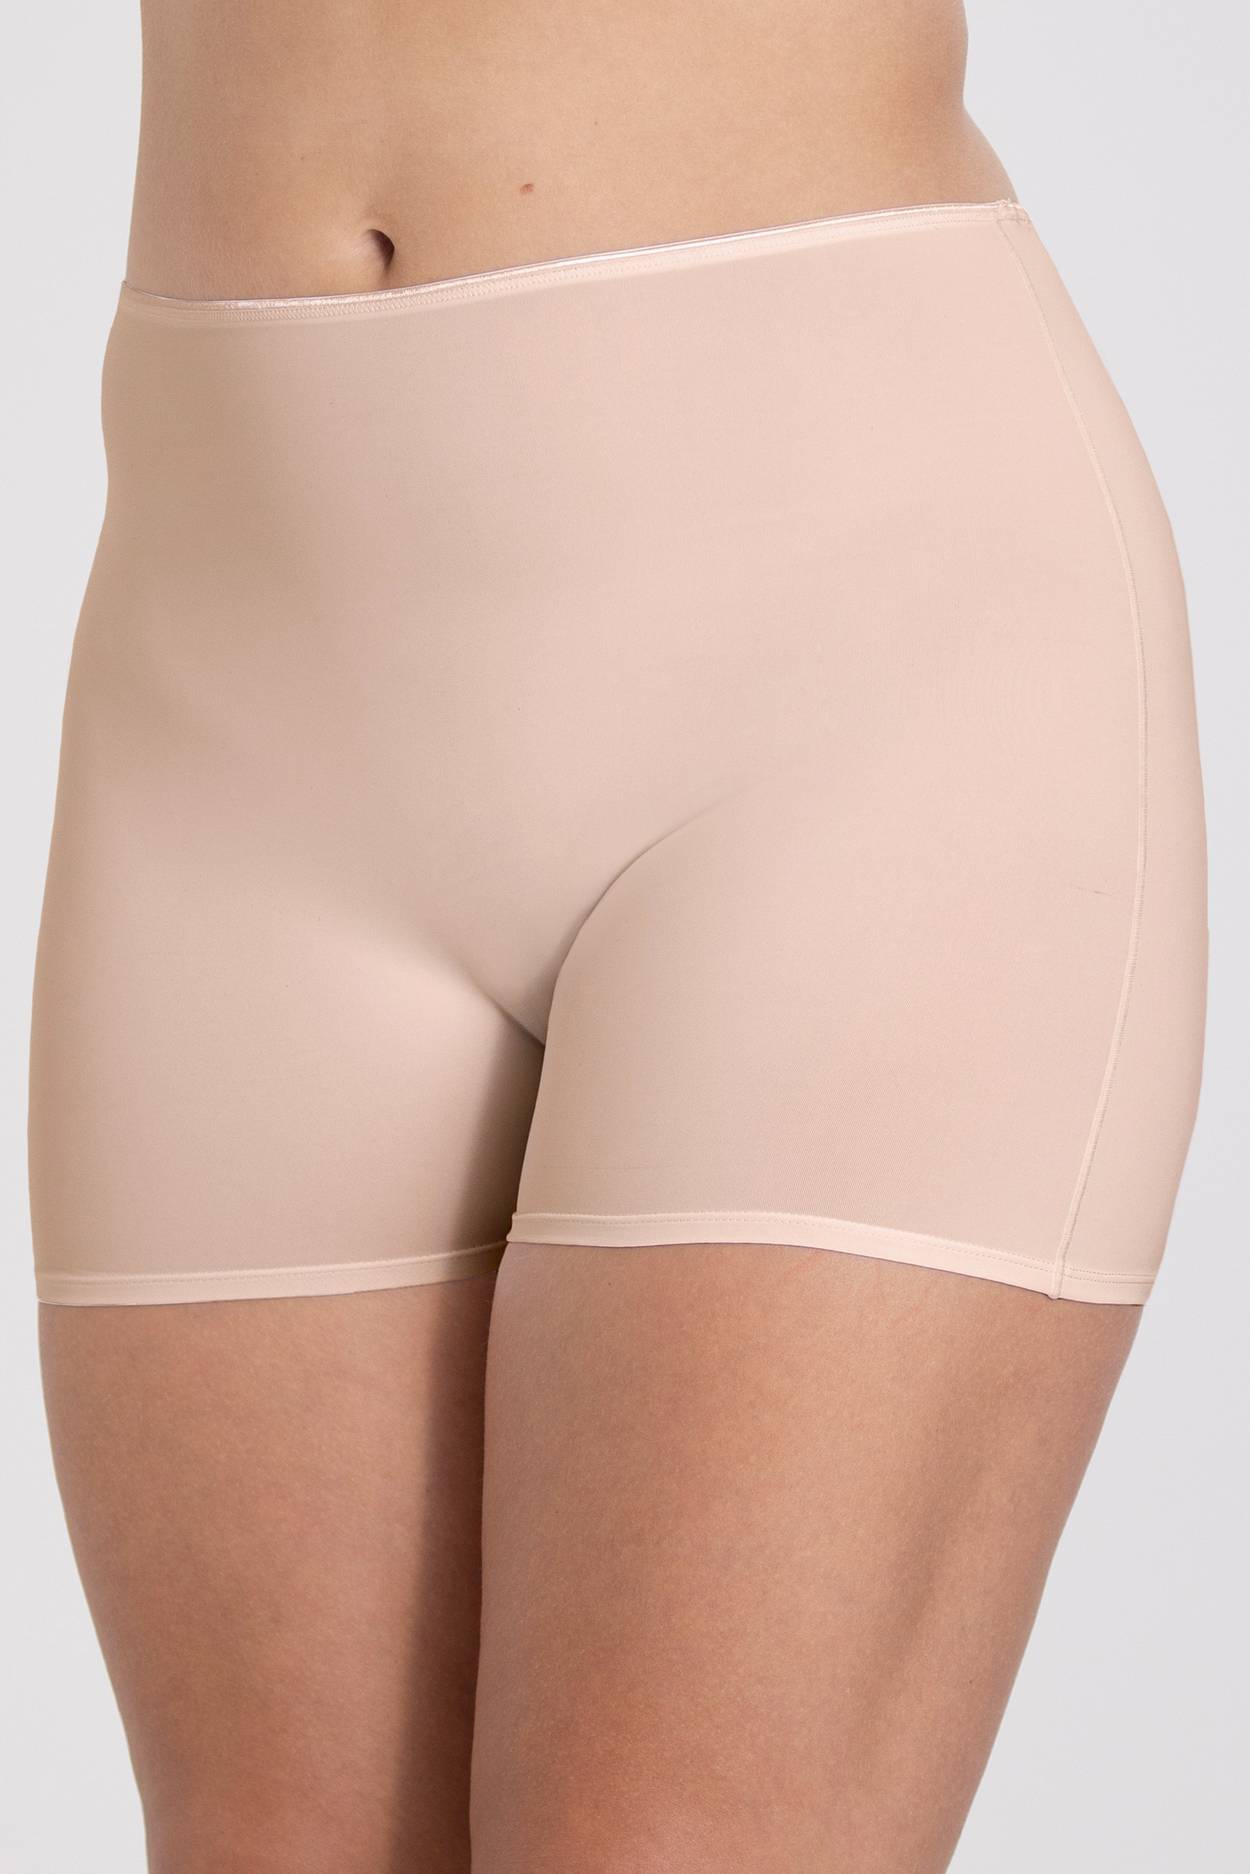 Recycled Comfort shorty panty